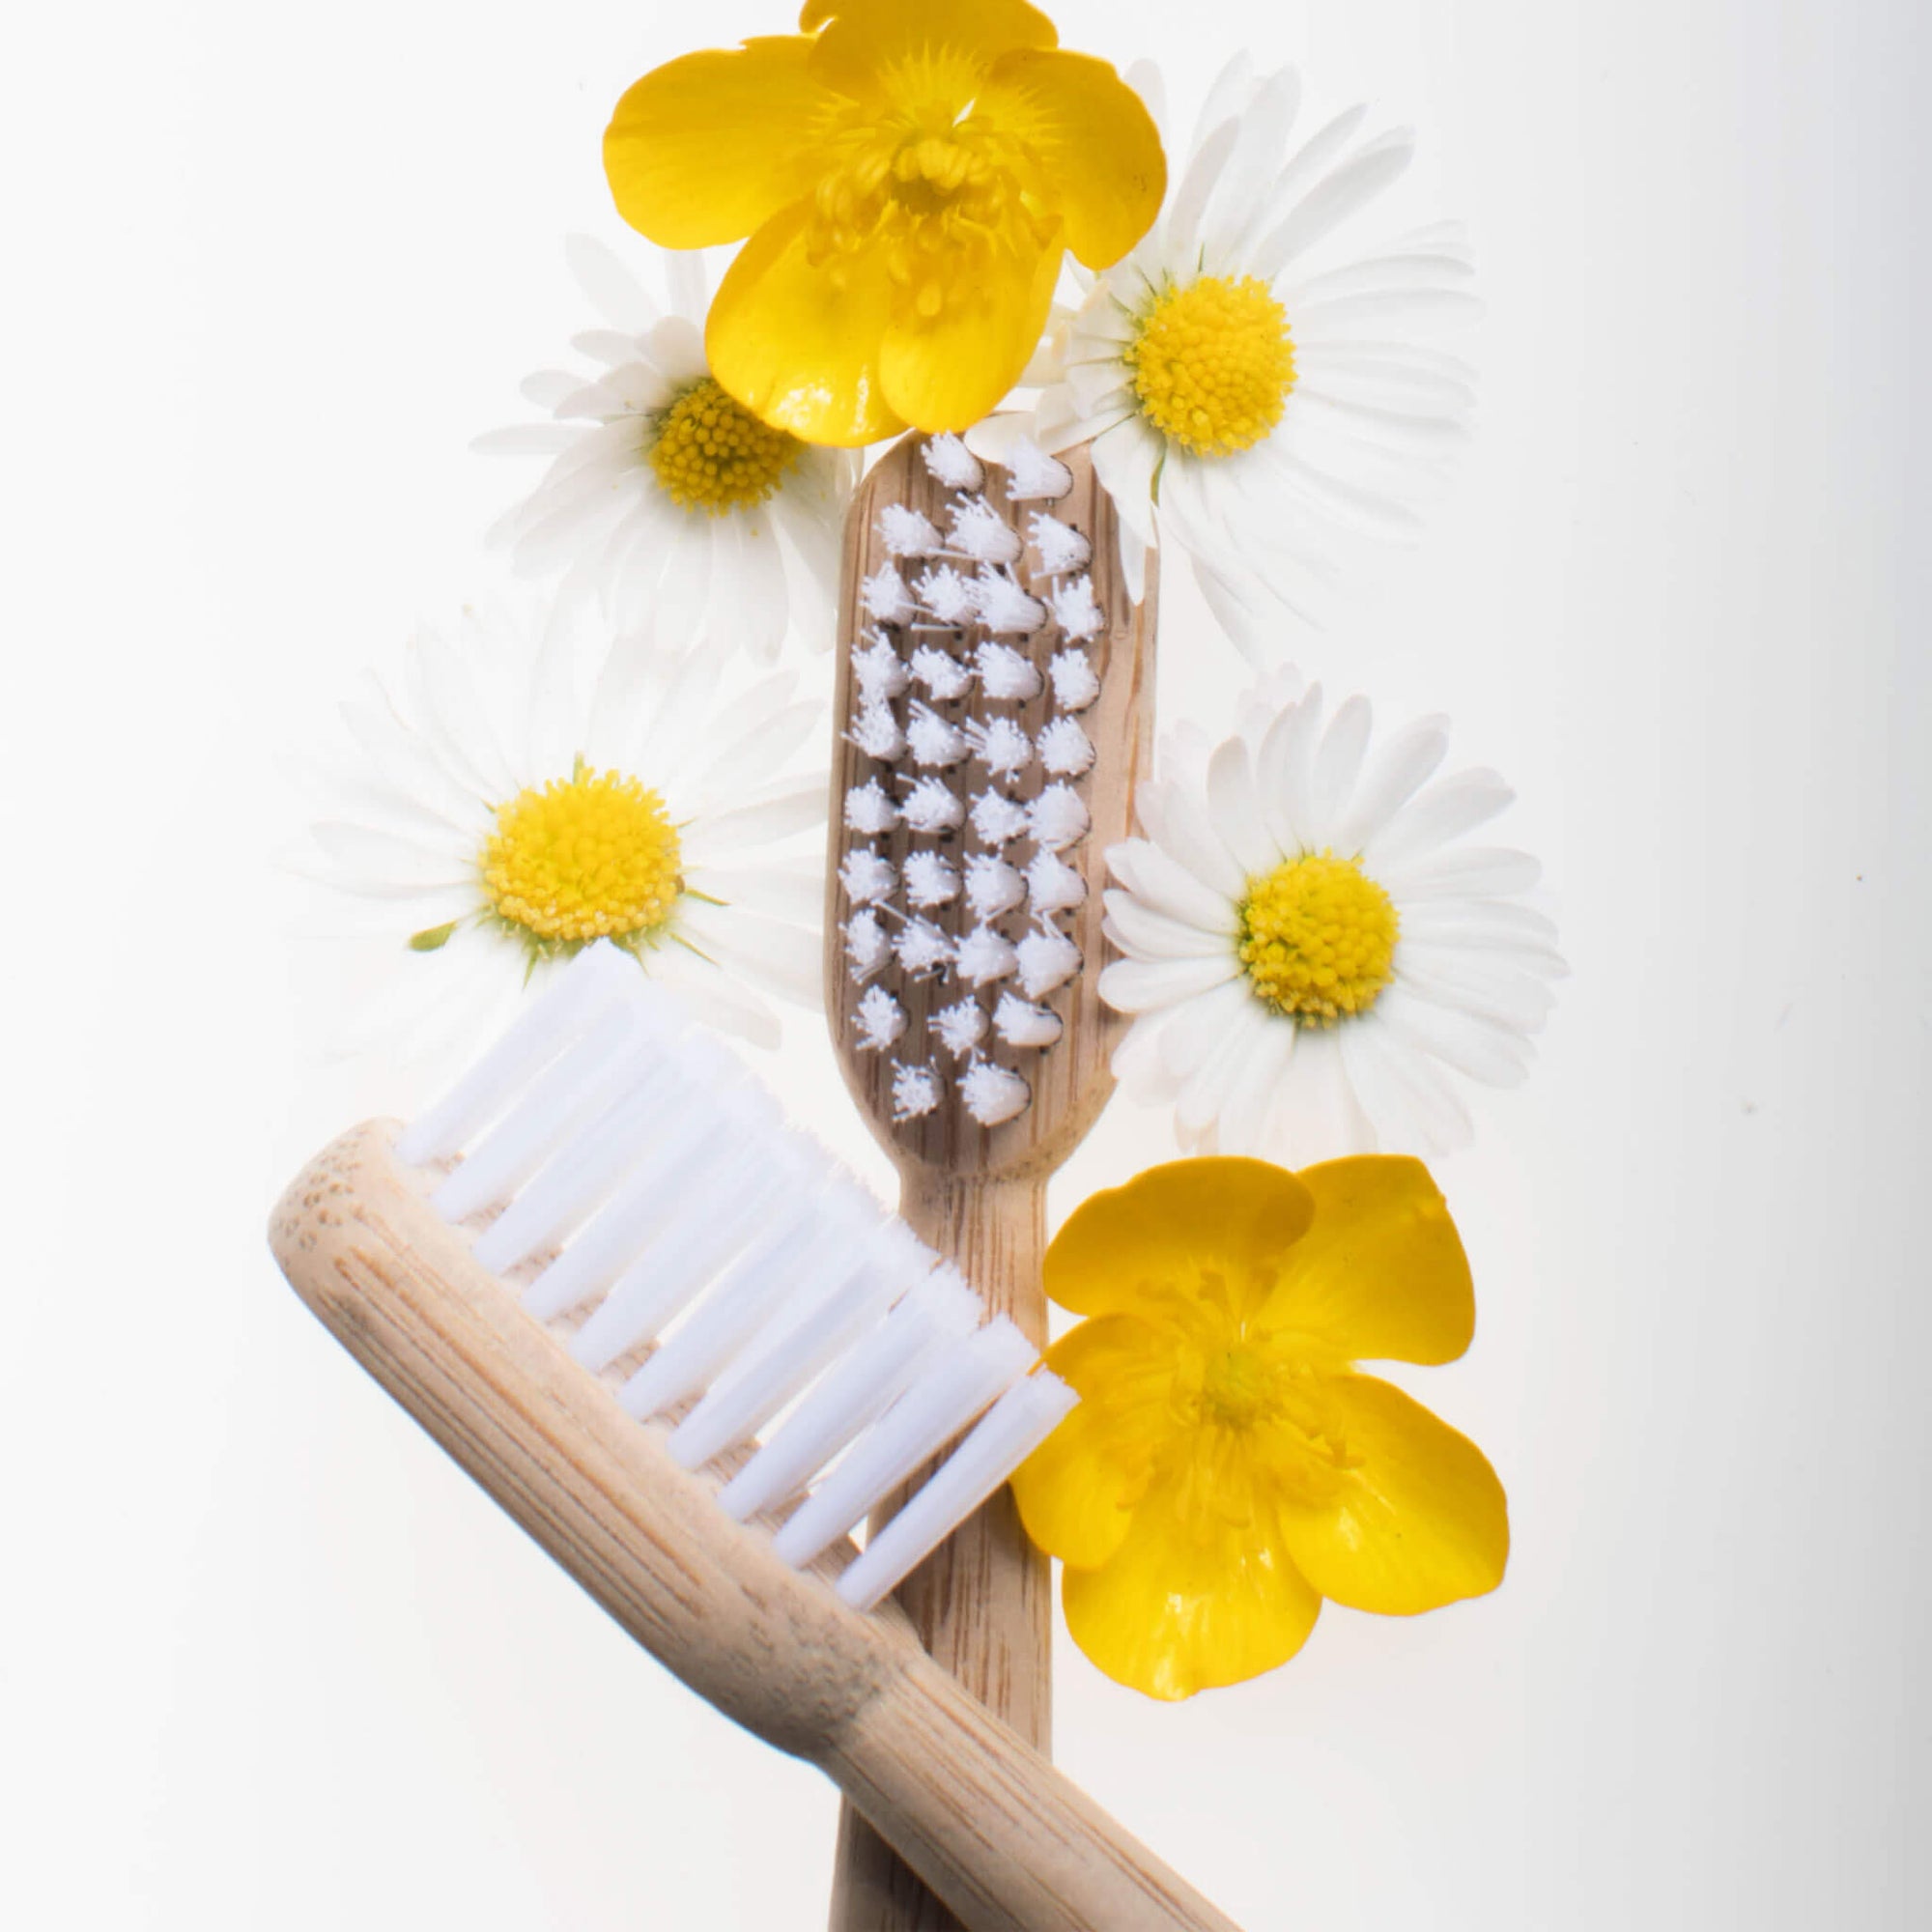 MABLE® Bamboo toothbrush 2 pack: Non-toxic and BPA-free Nylon® bristles. Bamboo handle is compostable.